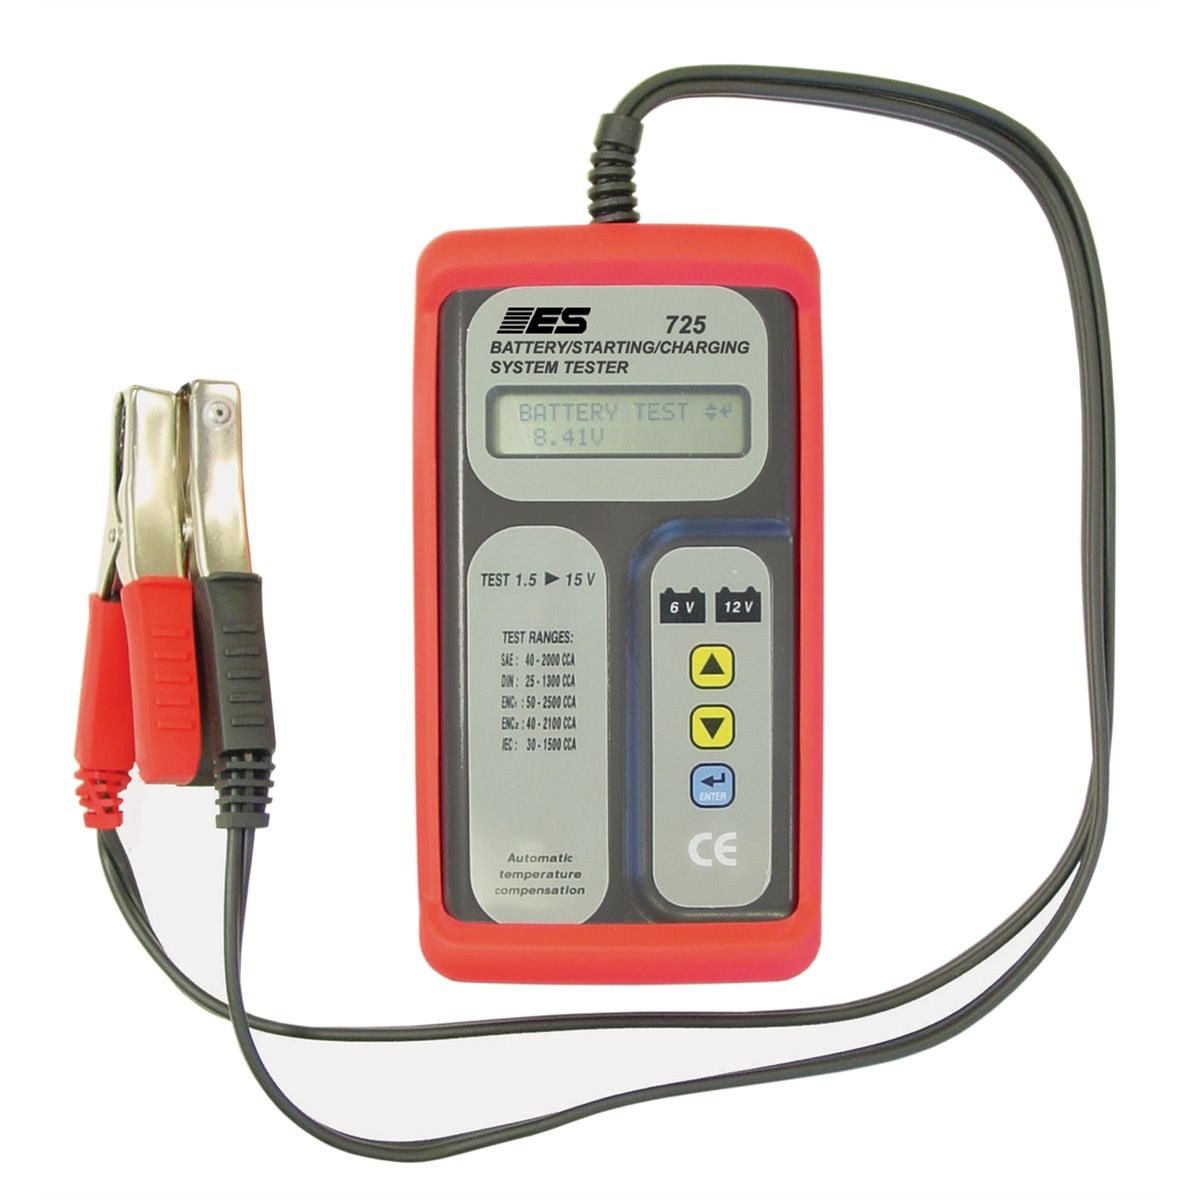 Battery & Starting/Charging System Tester